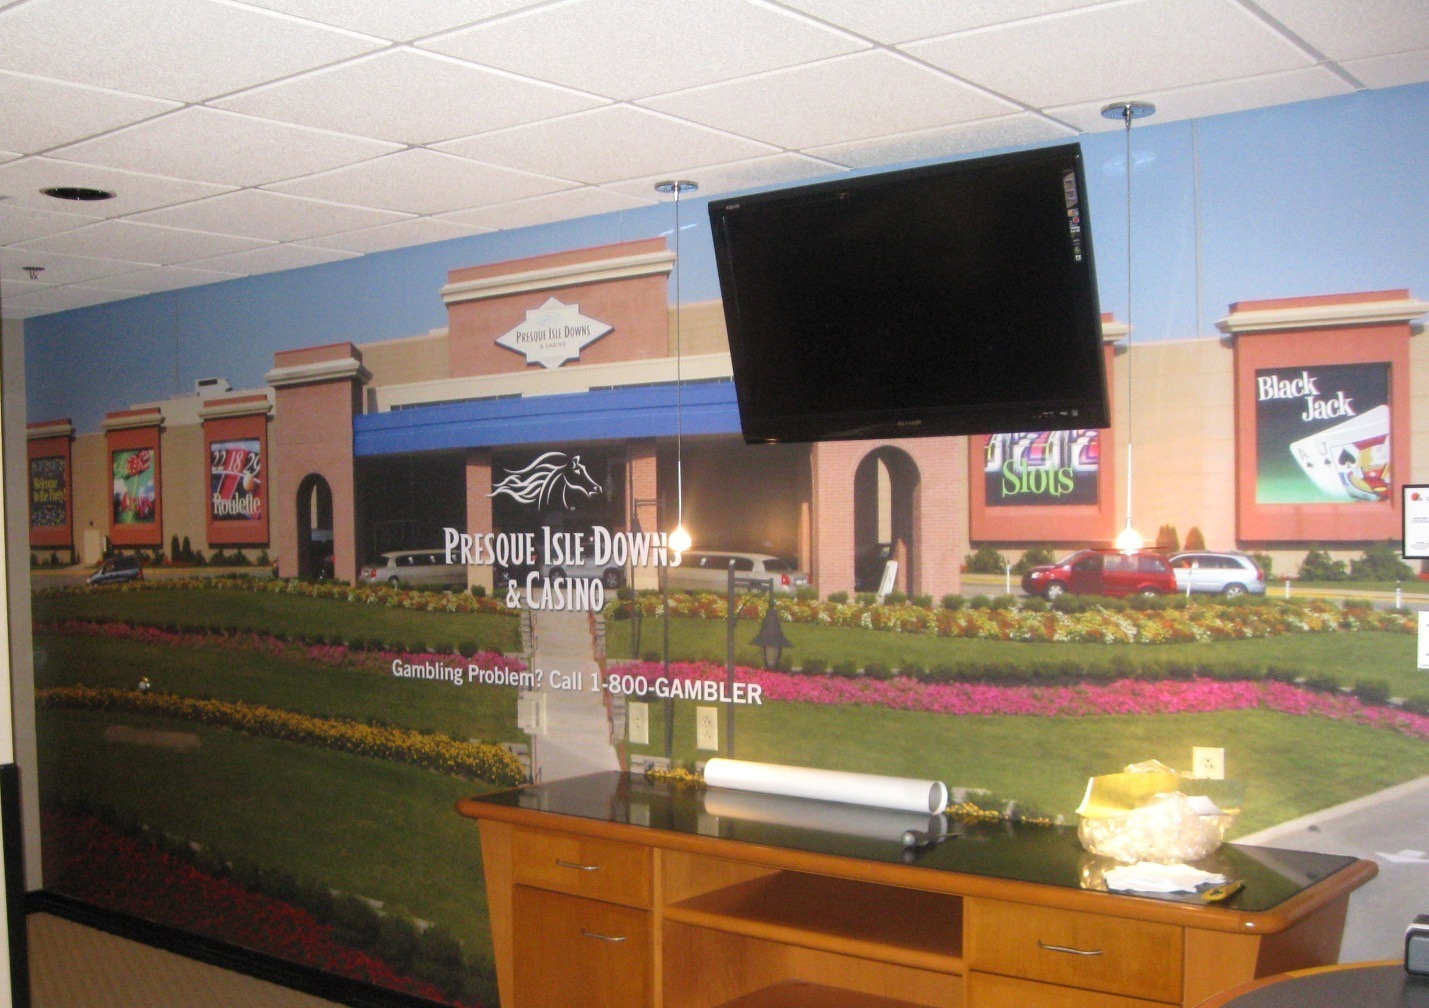 Full 4 color wall coverings printed in our wide format department and installed by our team at Presque Isle Downs and Casino.